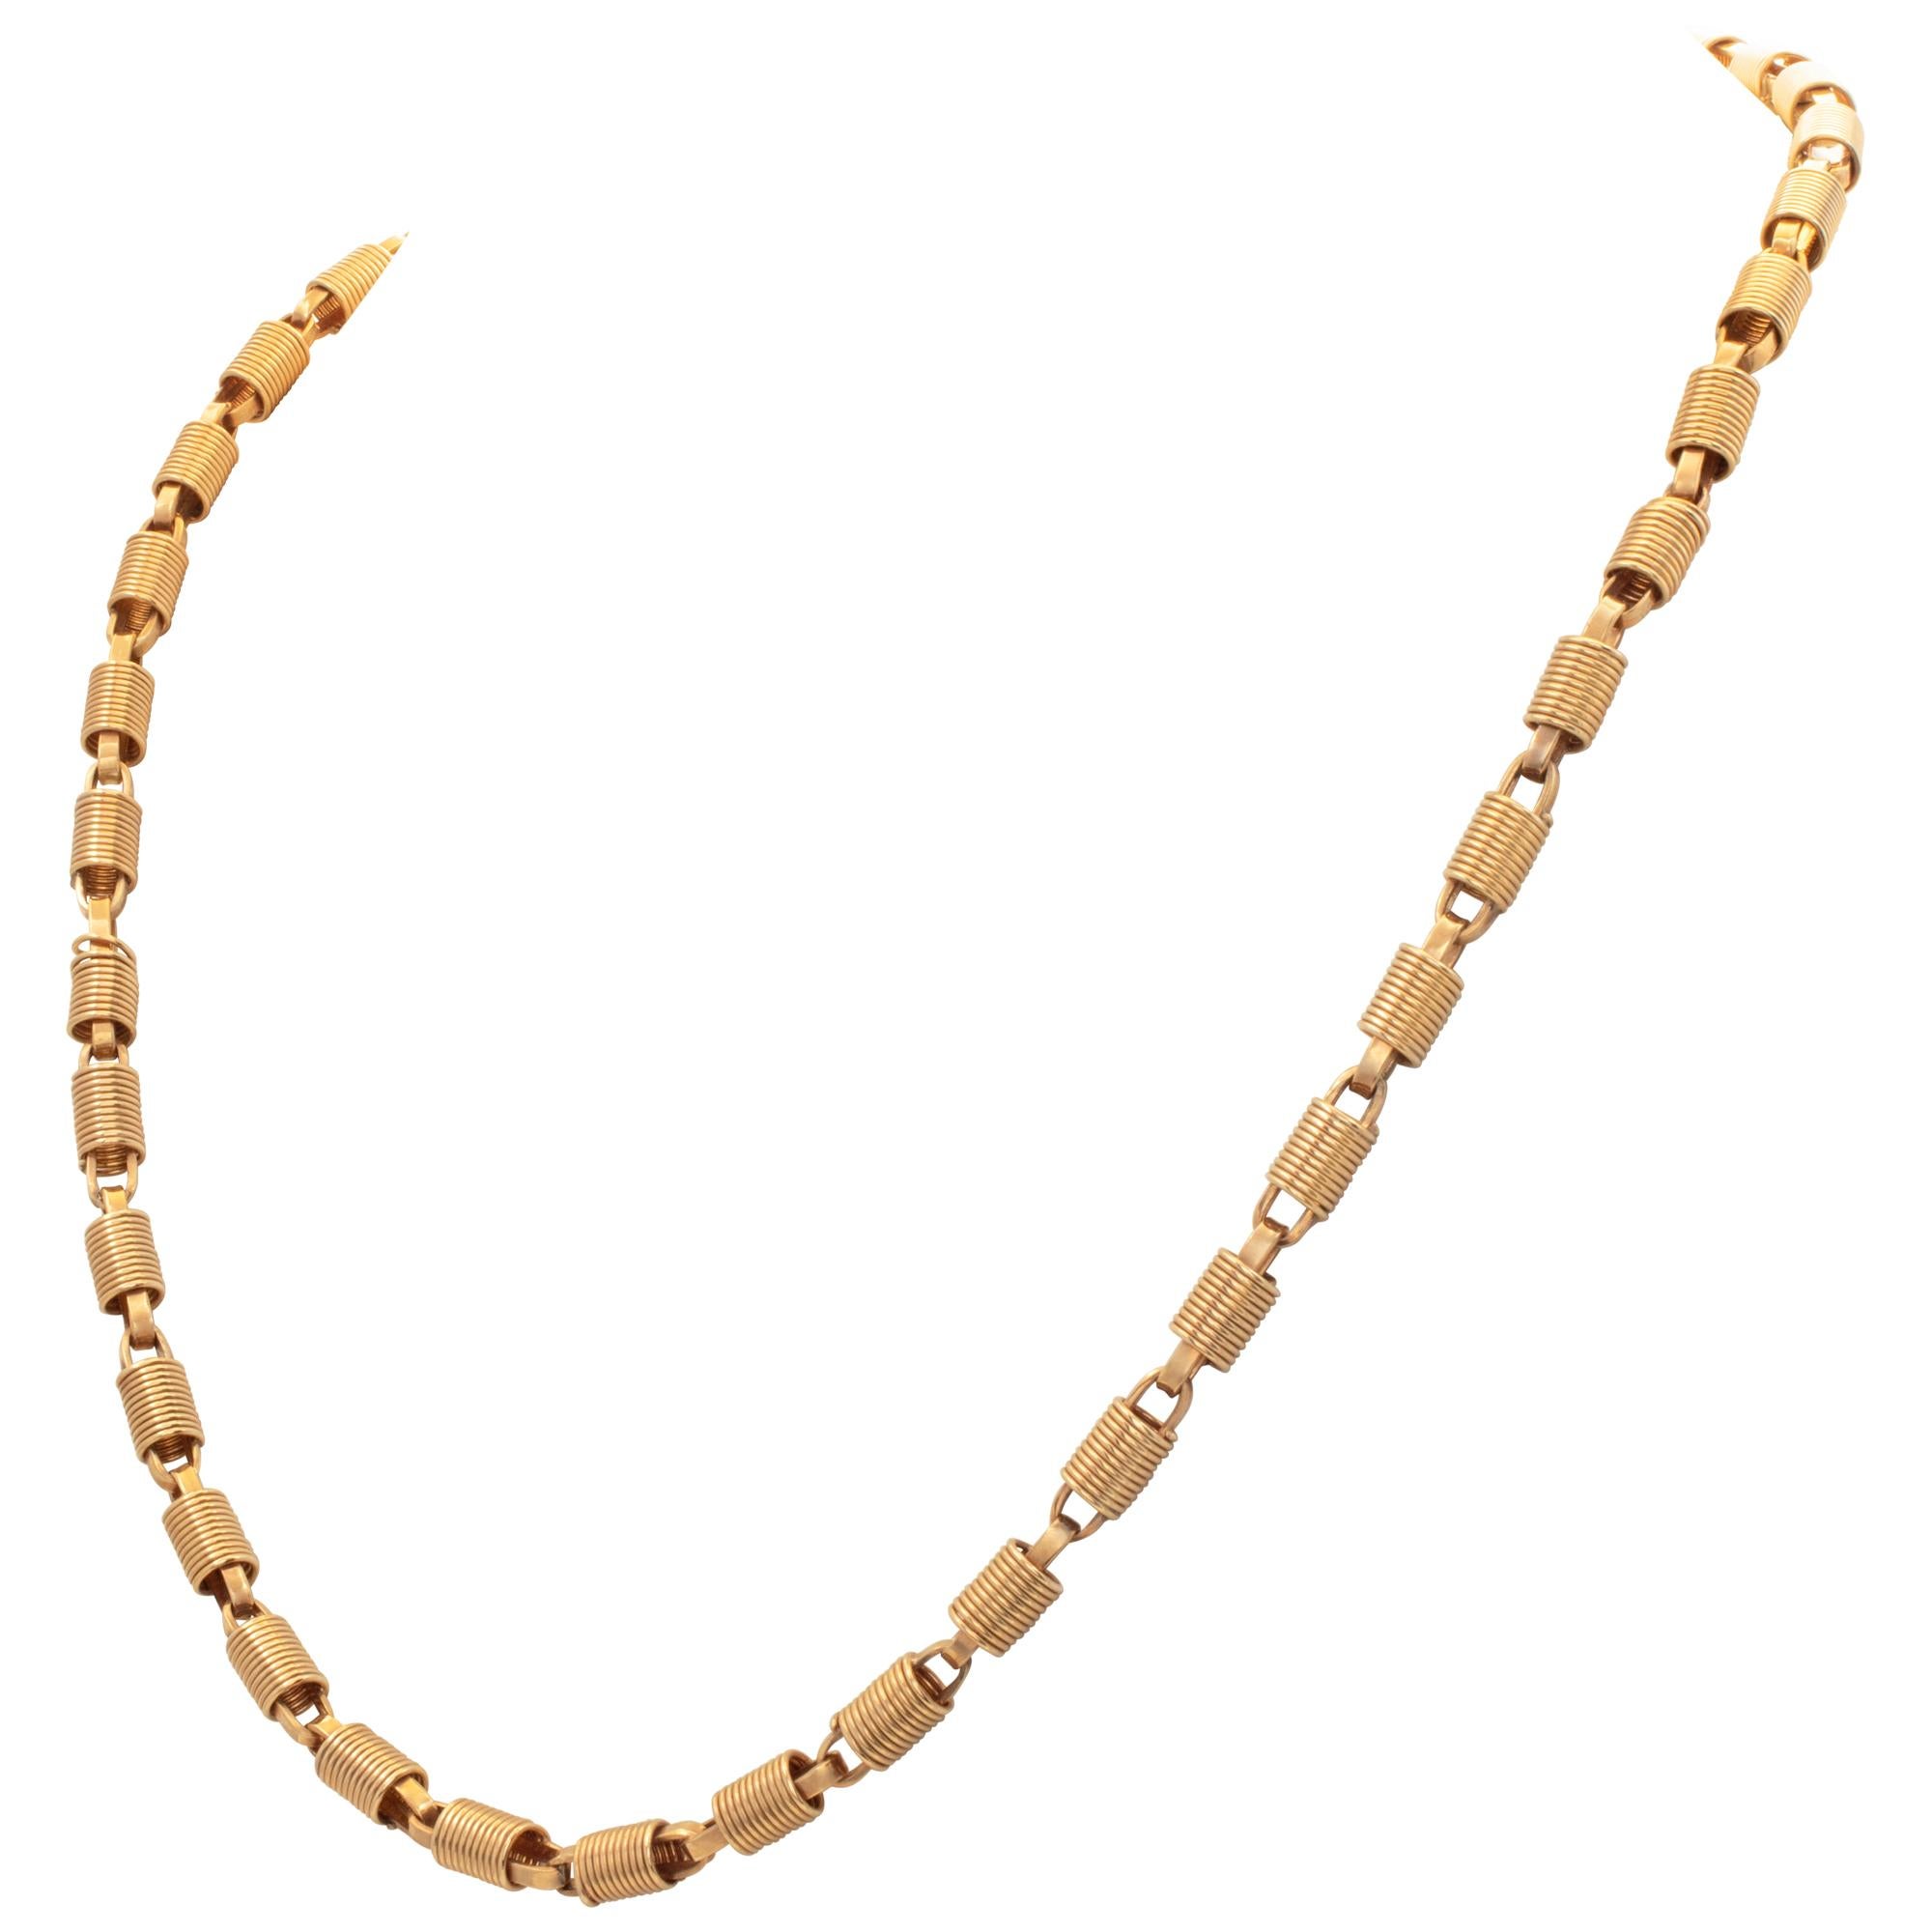 Unique Barrel coil necklace in 14k yellow gold. Length 18